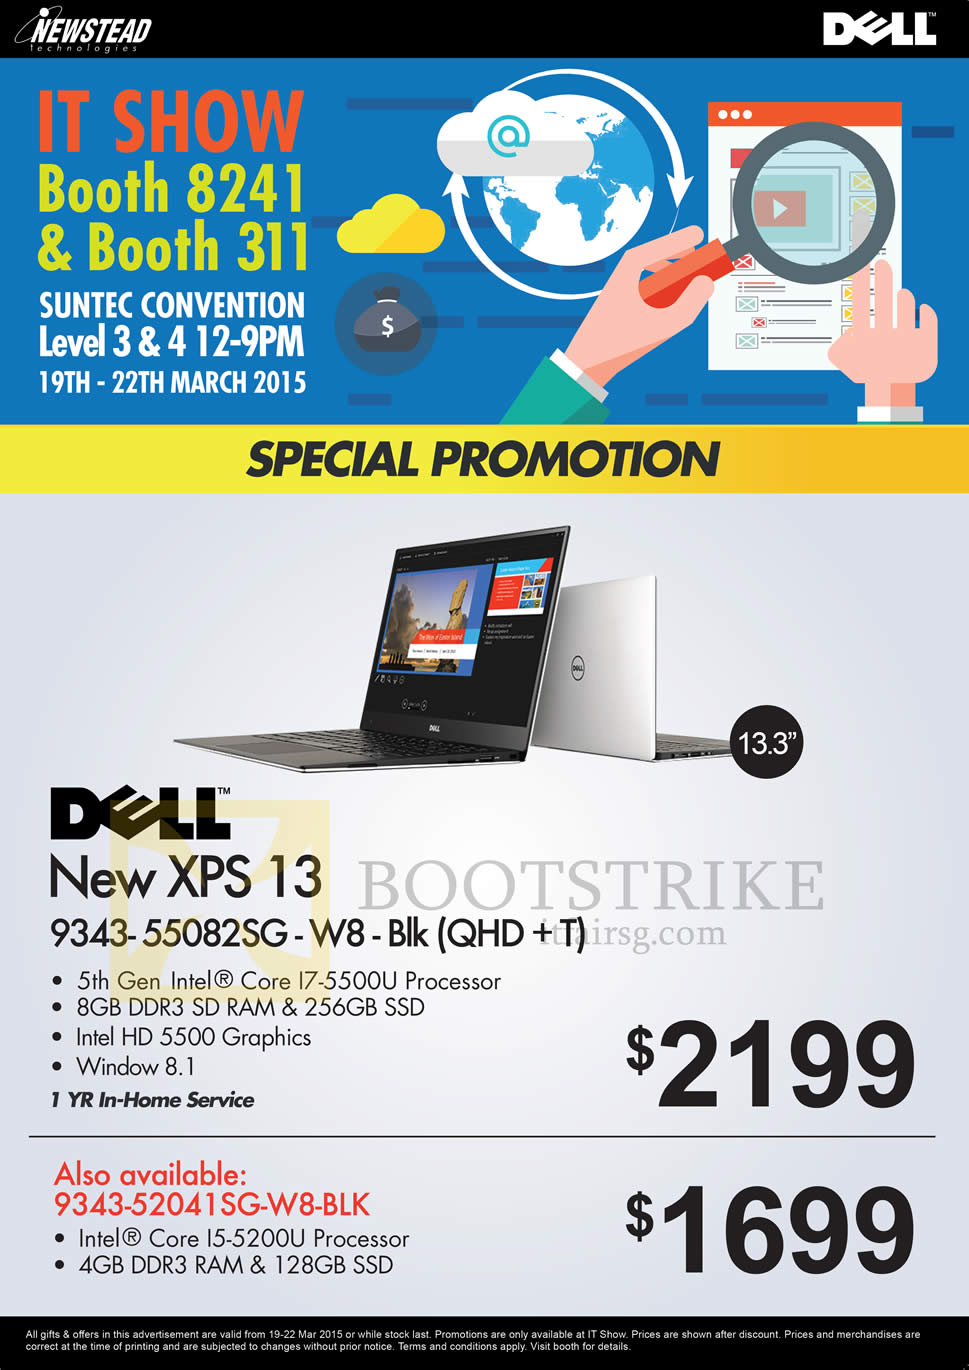 IT SHOW 2015 price list image brochure of Dell Newstead Notebooks XPS 13